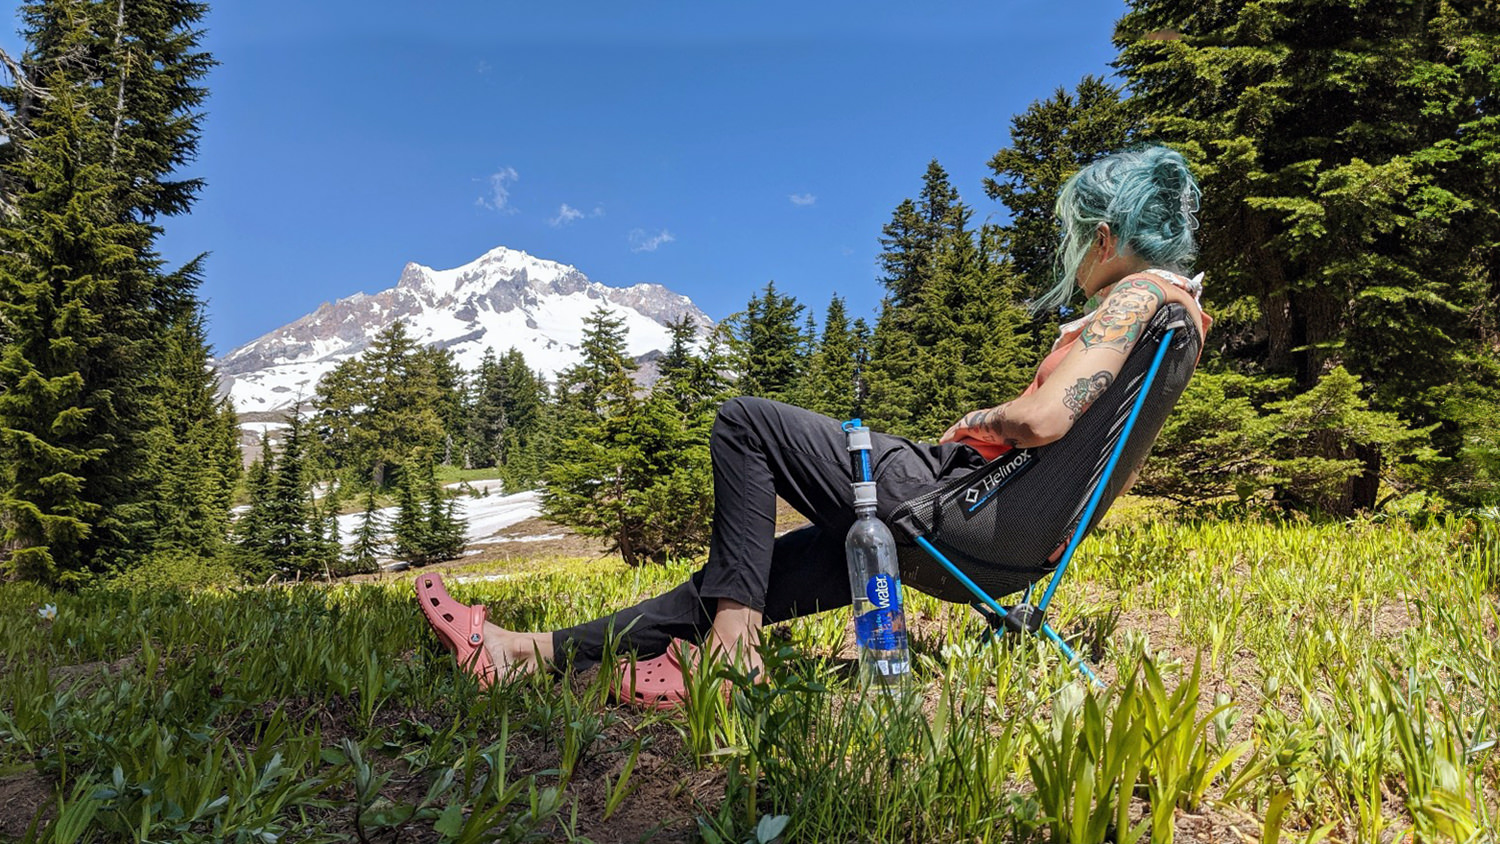 9 Lightest Camping Chairs & Best Comfort Backpacking Stools